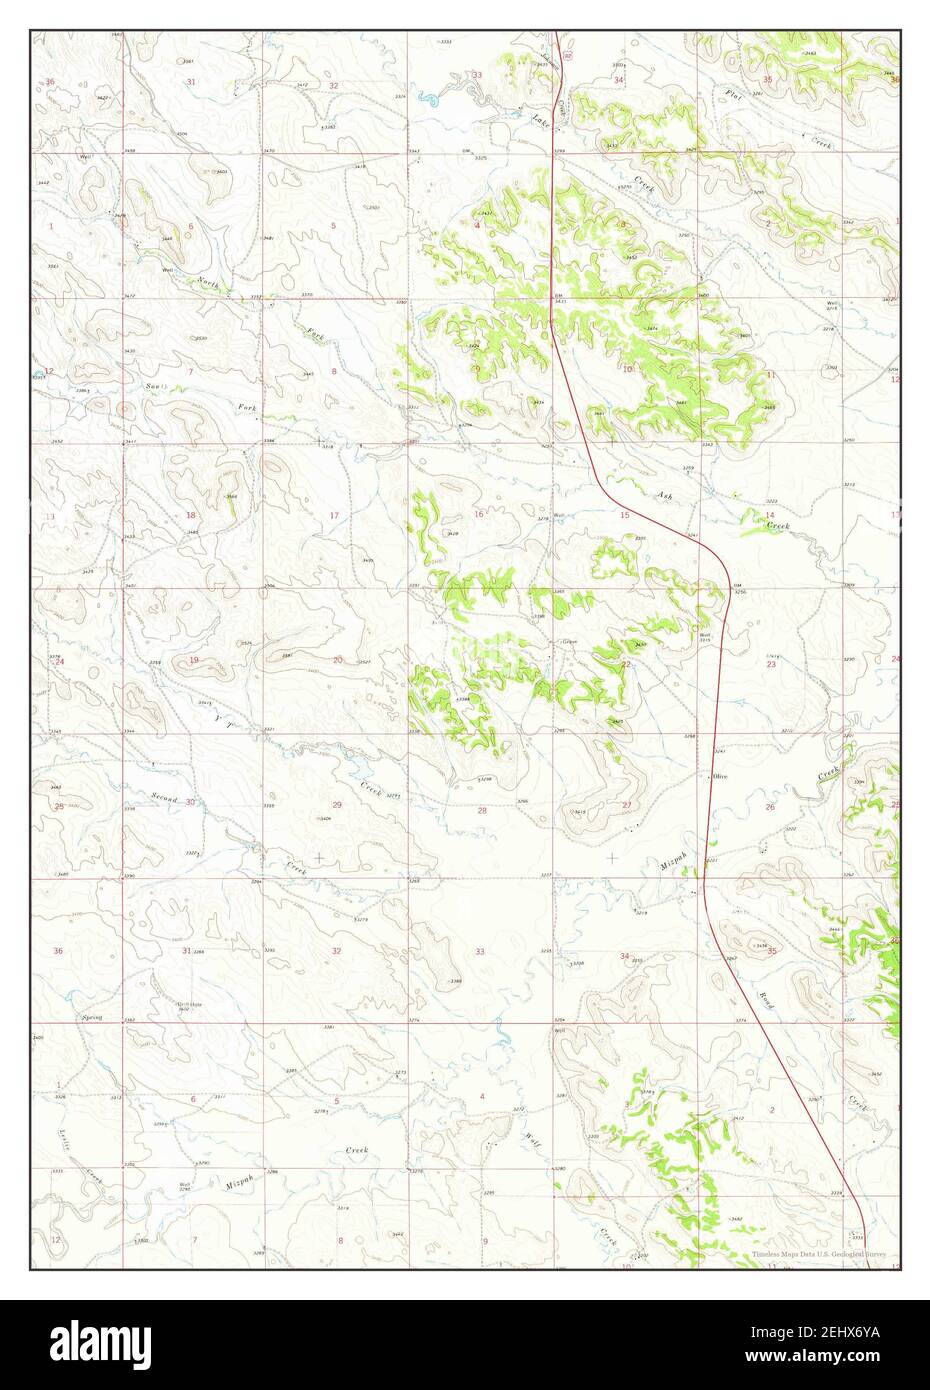 Olive, Montana, map 1973, 1:24000, United States of America by Timeless Maps, data U.S. Geological Survey Stock Photo